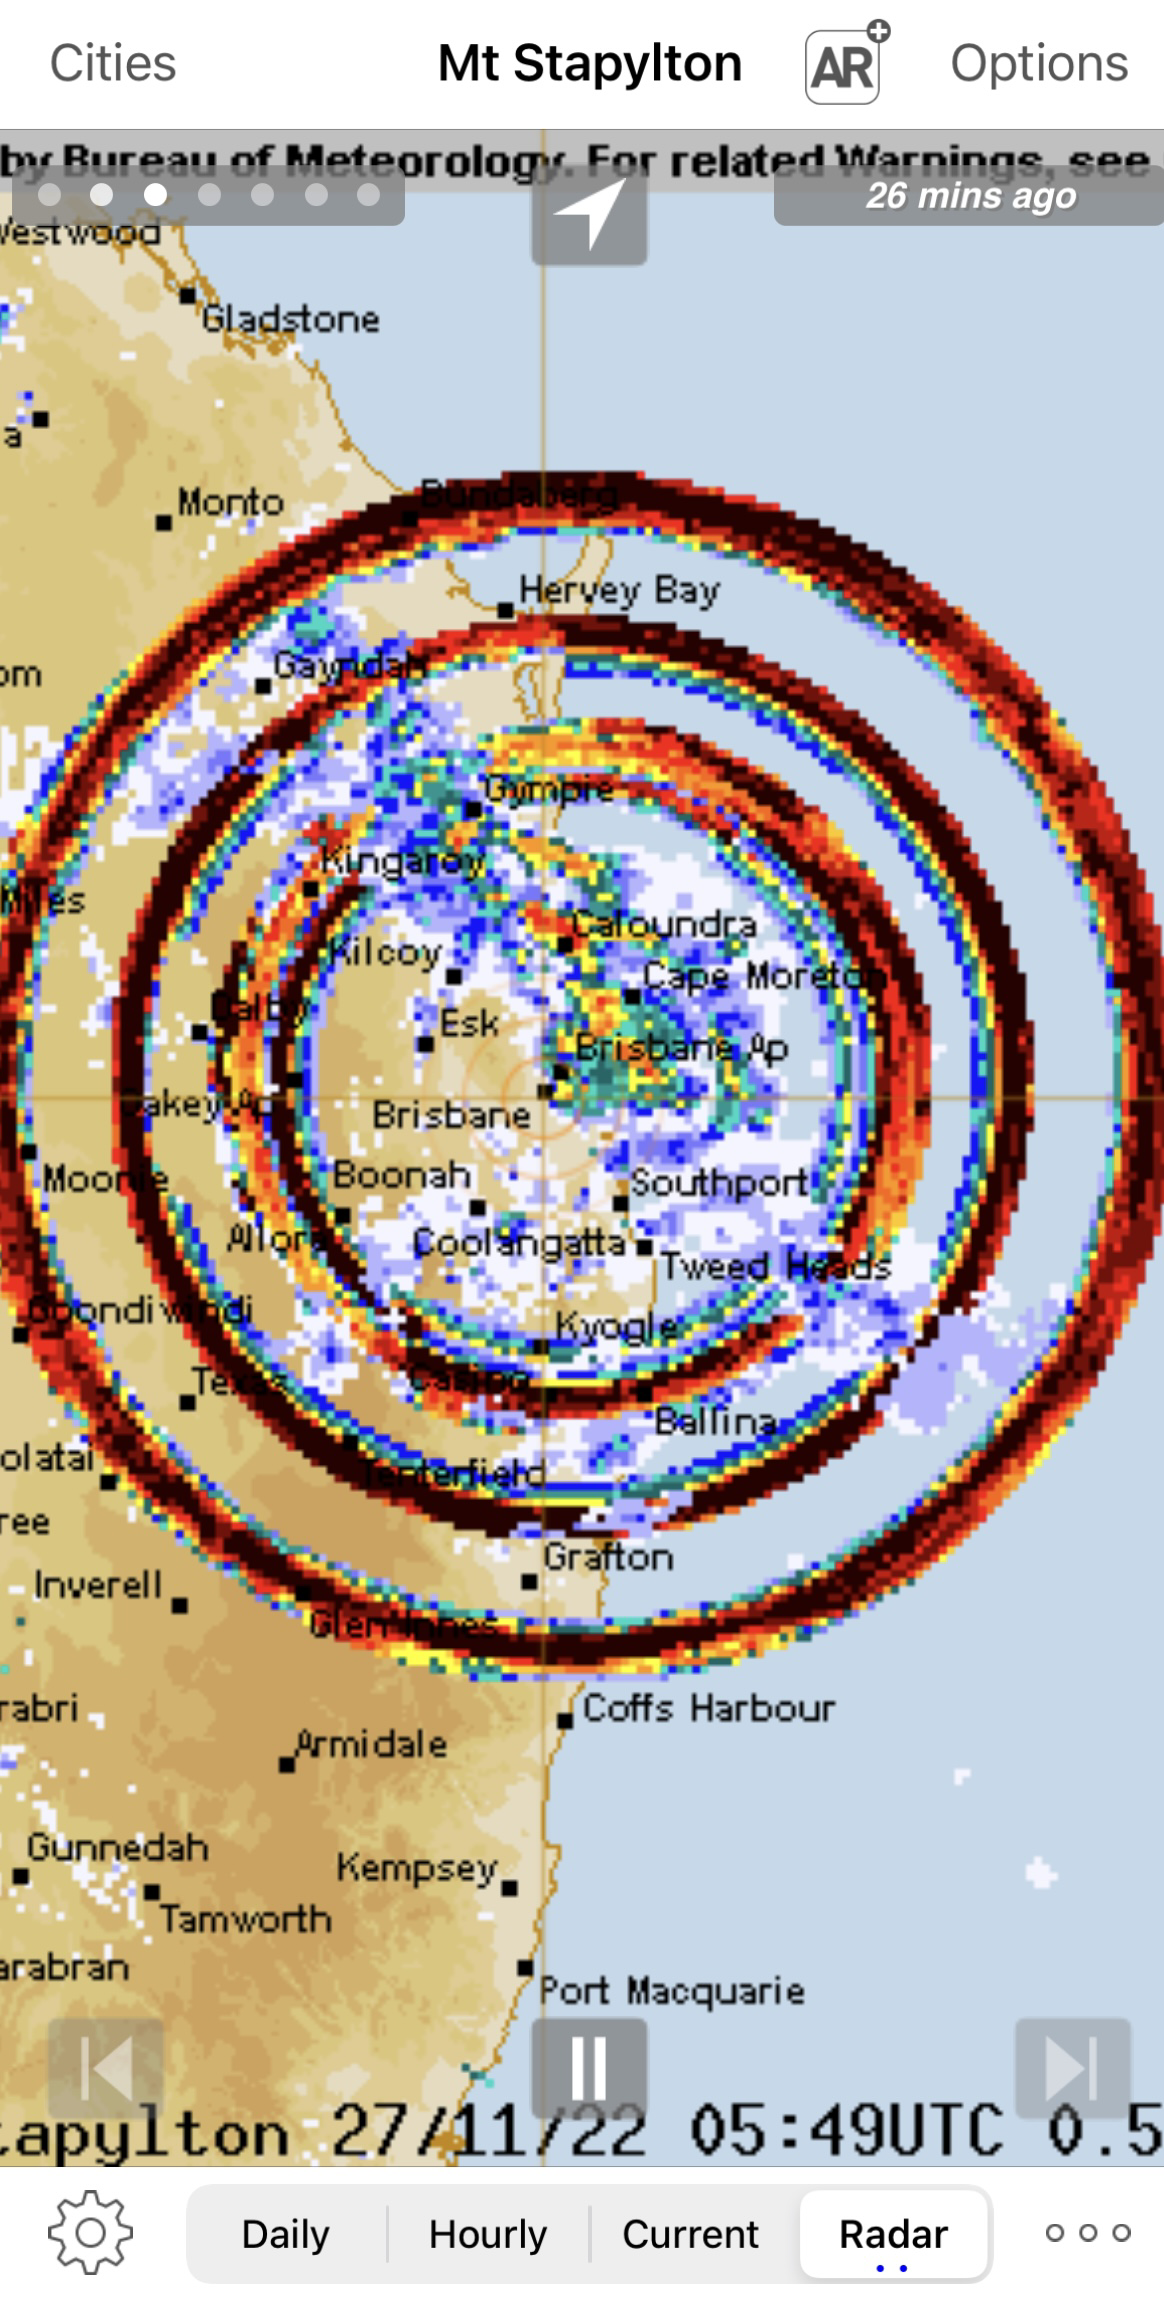 A radar image from the Mt Stapylton weather radar showing three concentric rings of red and black, which normally means a severe storm. In this case it is an error.